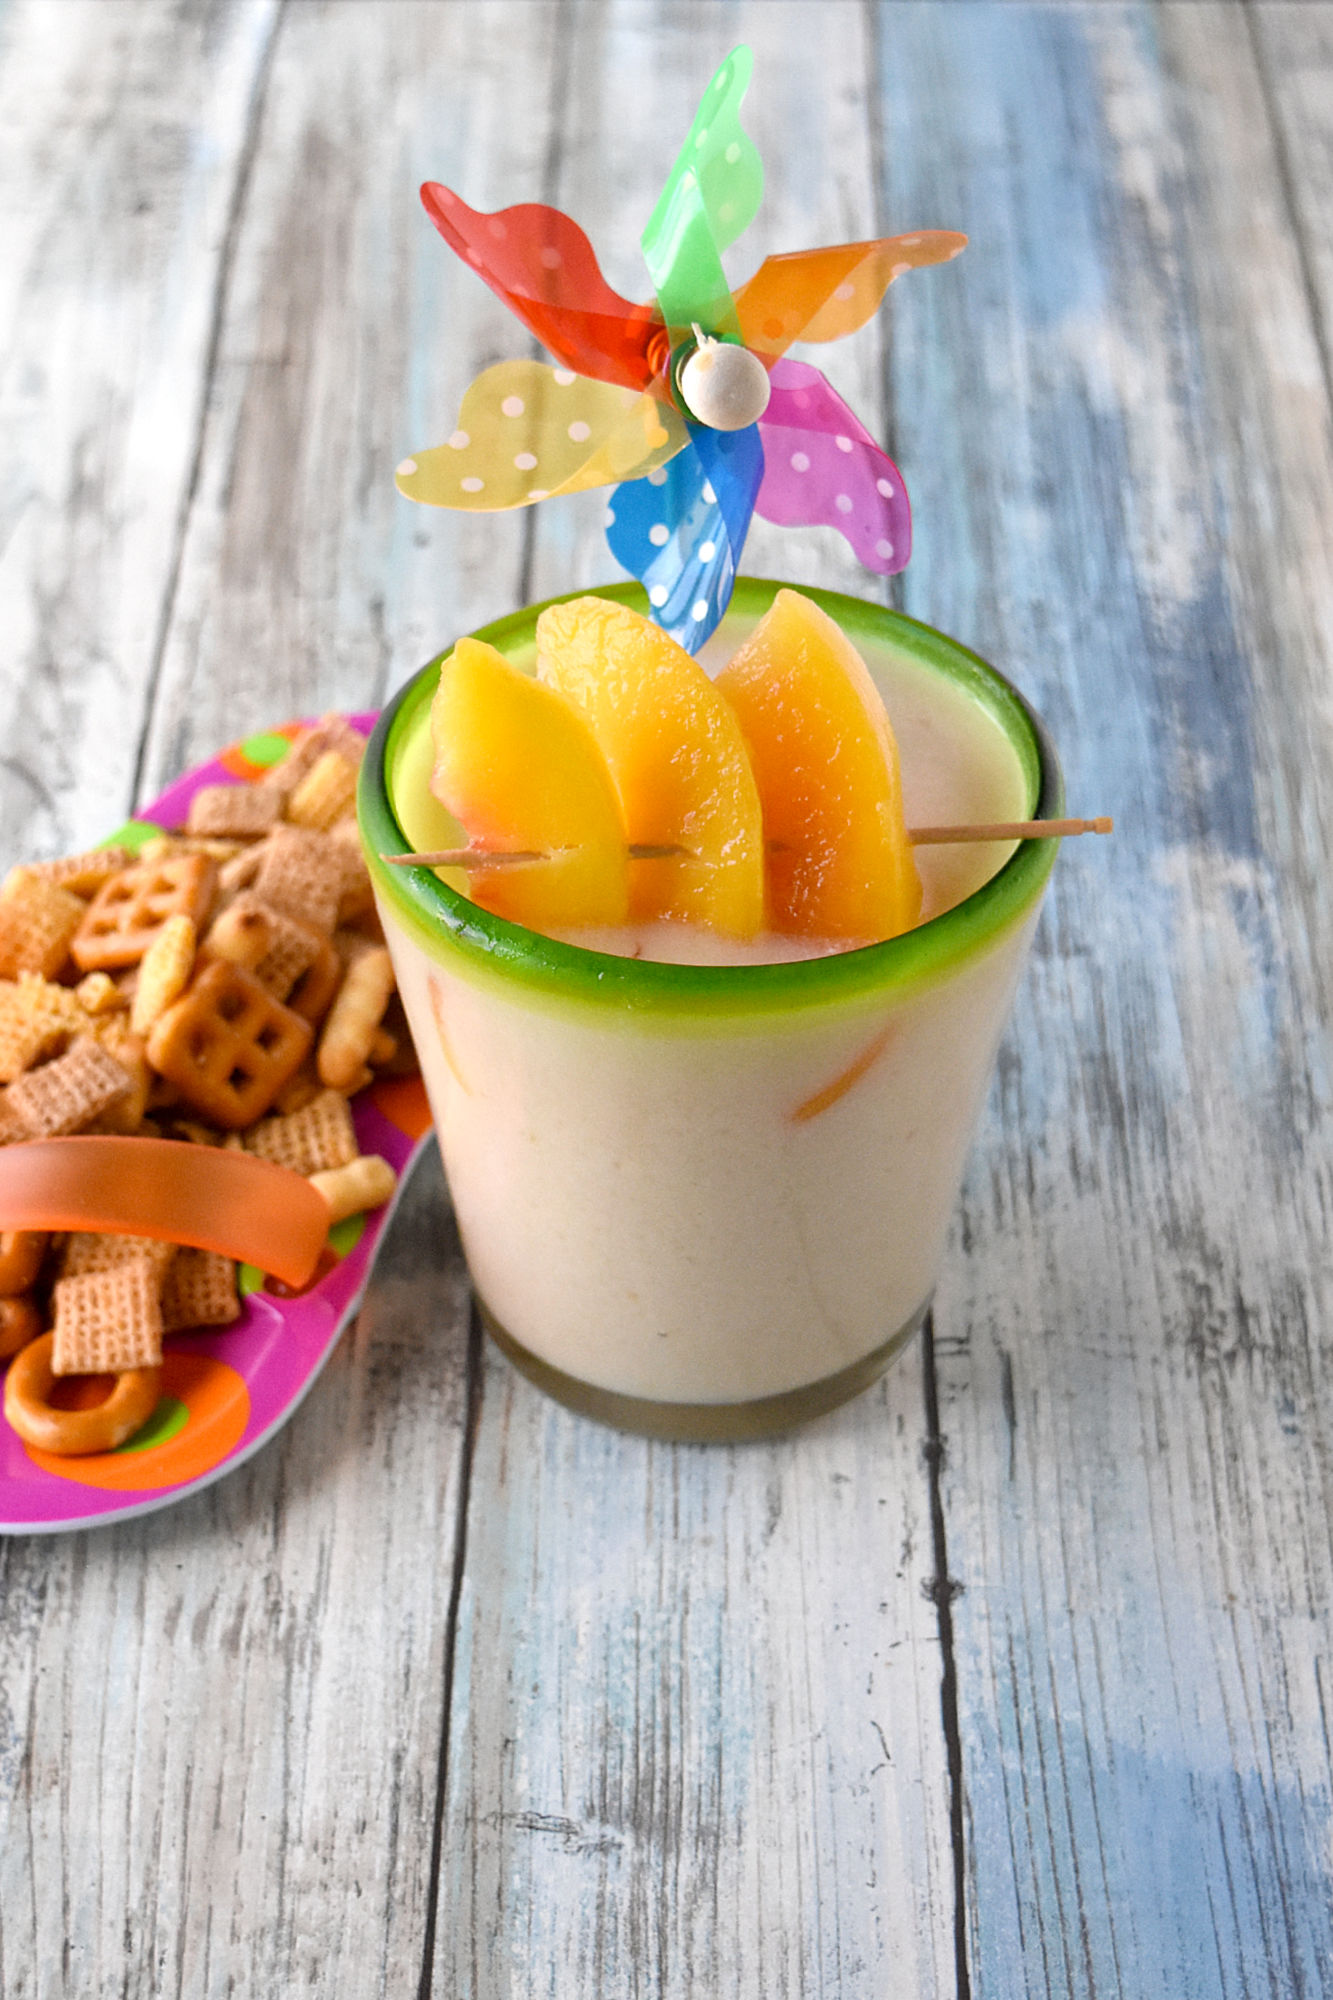 Peachy Colada has simple ingredients and tastes perfectly delicious.  Made with frozen peaches, 2 types of rum, and crema of coconut, it's a refreshing summer colada you'll enjoy. #OurFamilyTable